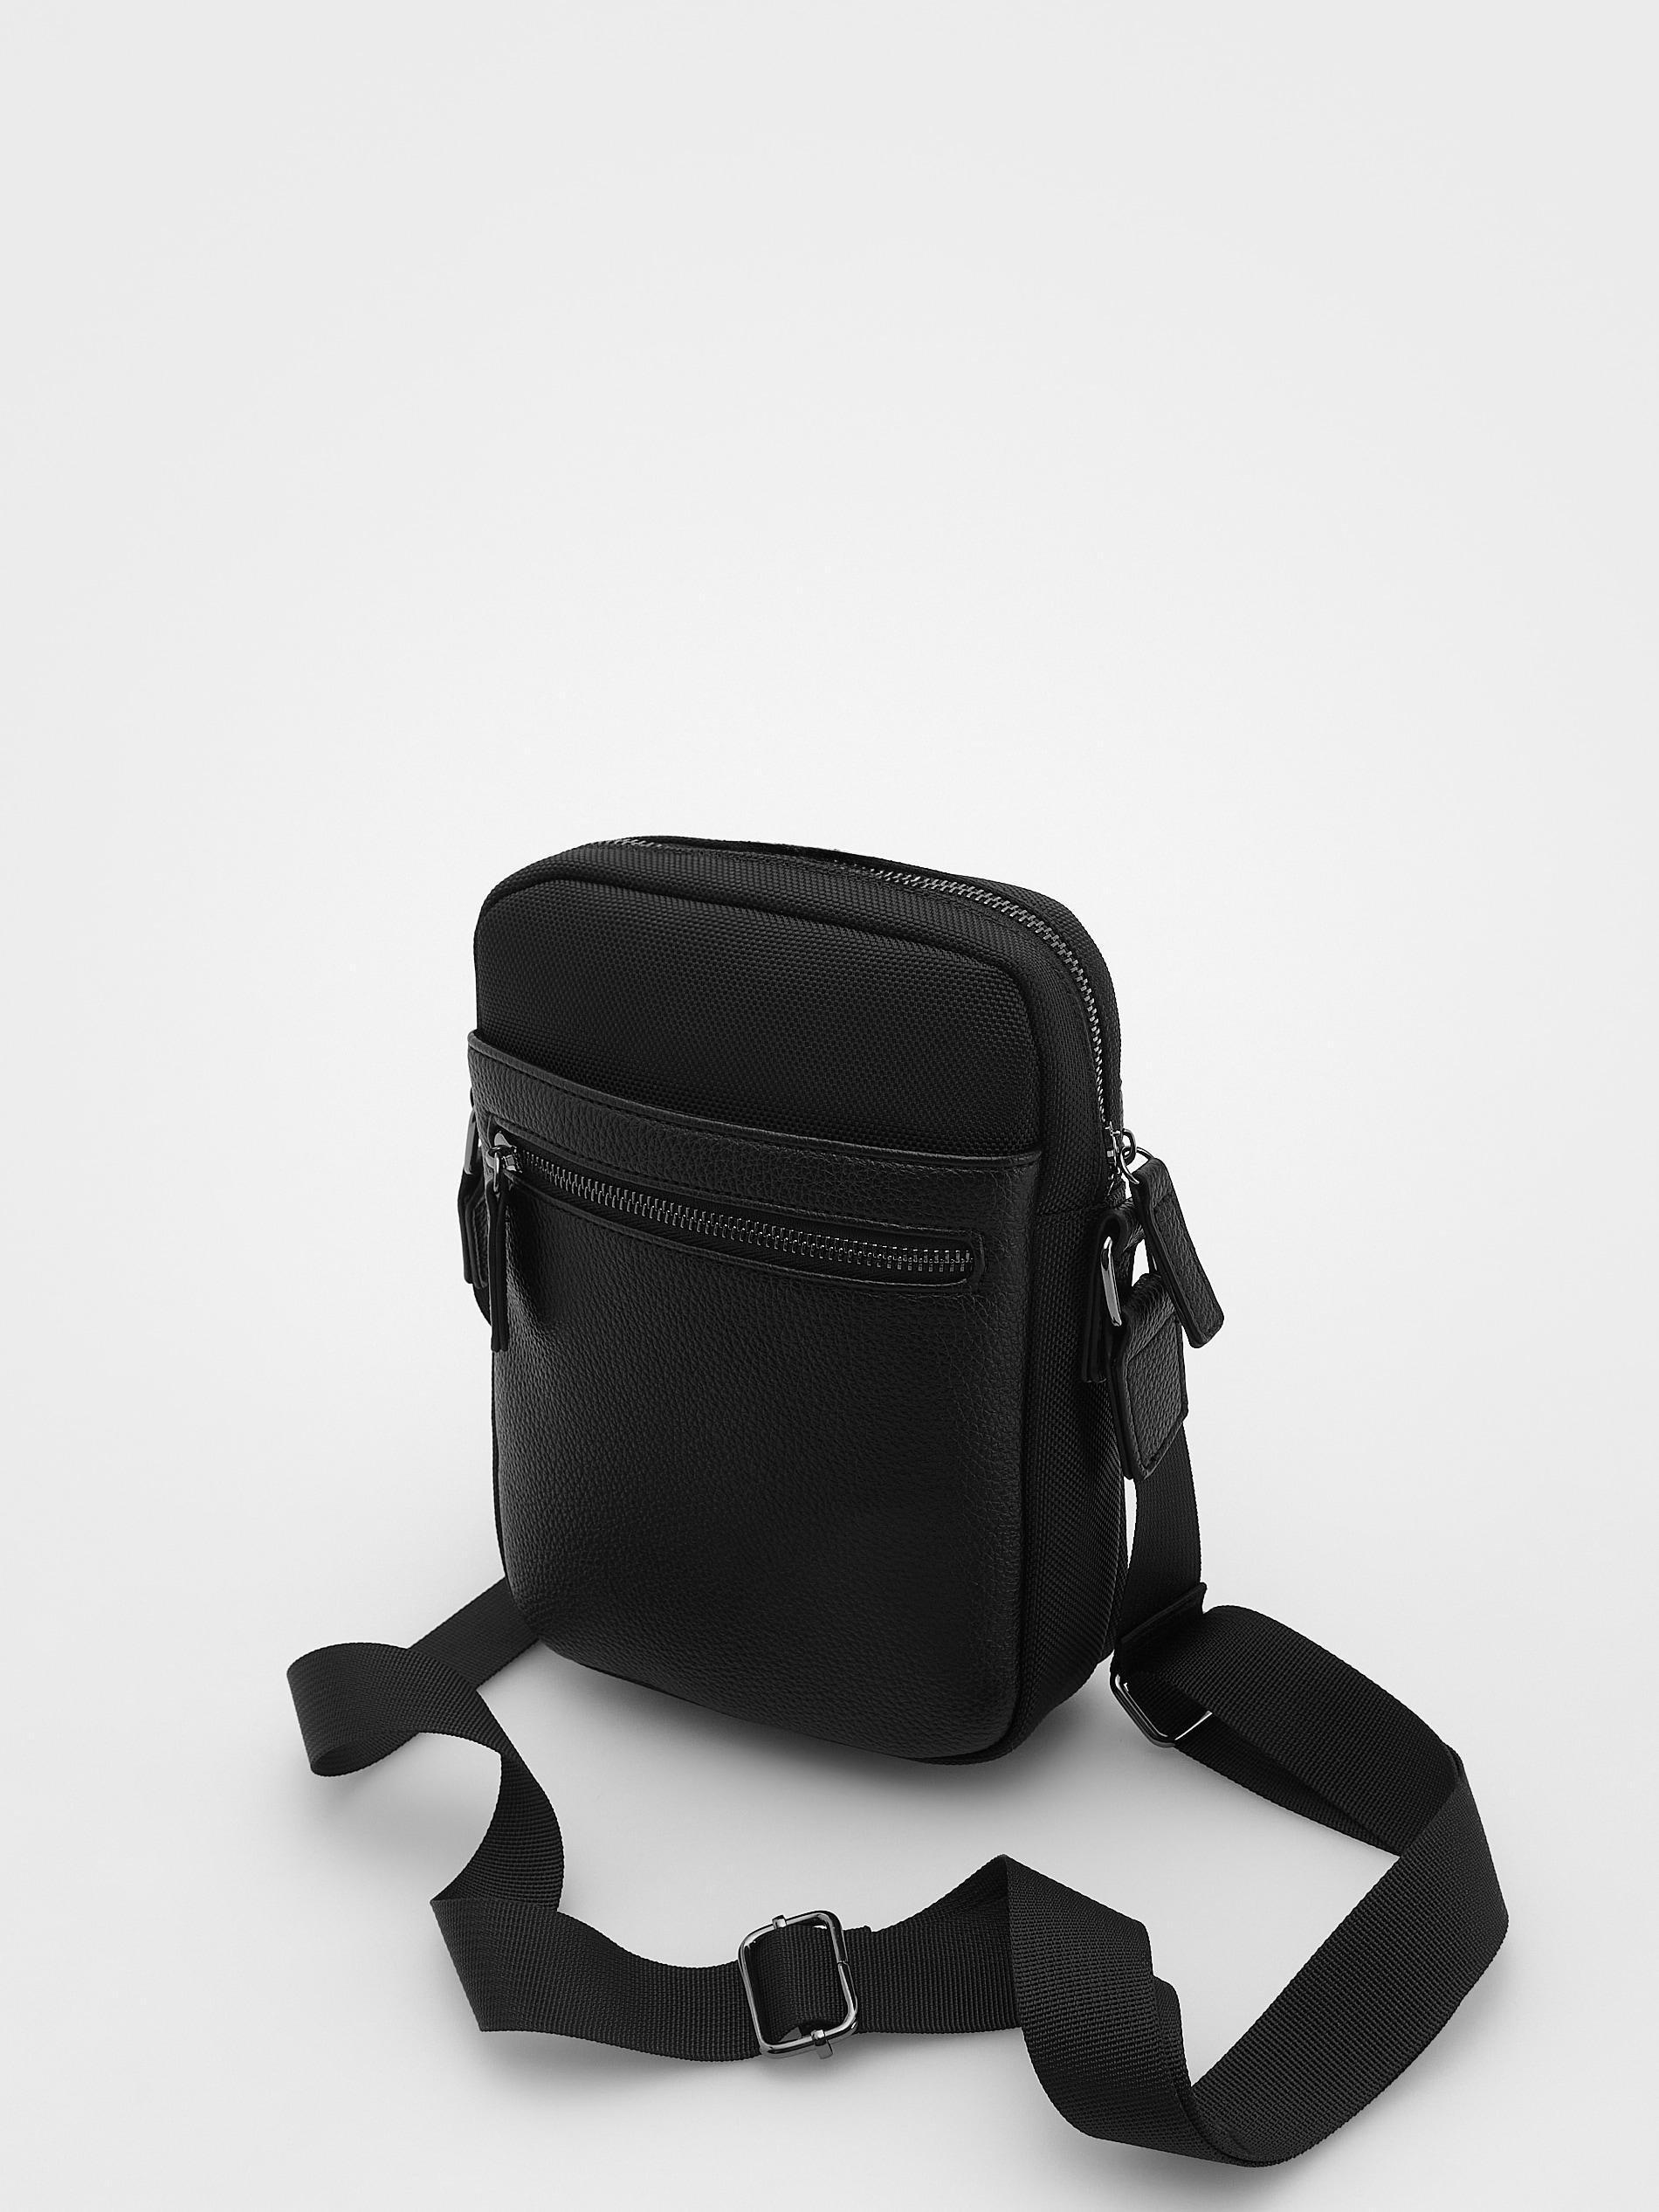 Reserved - Black Crossbody Pouch Bag